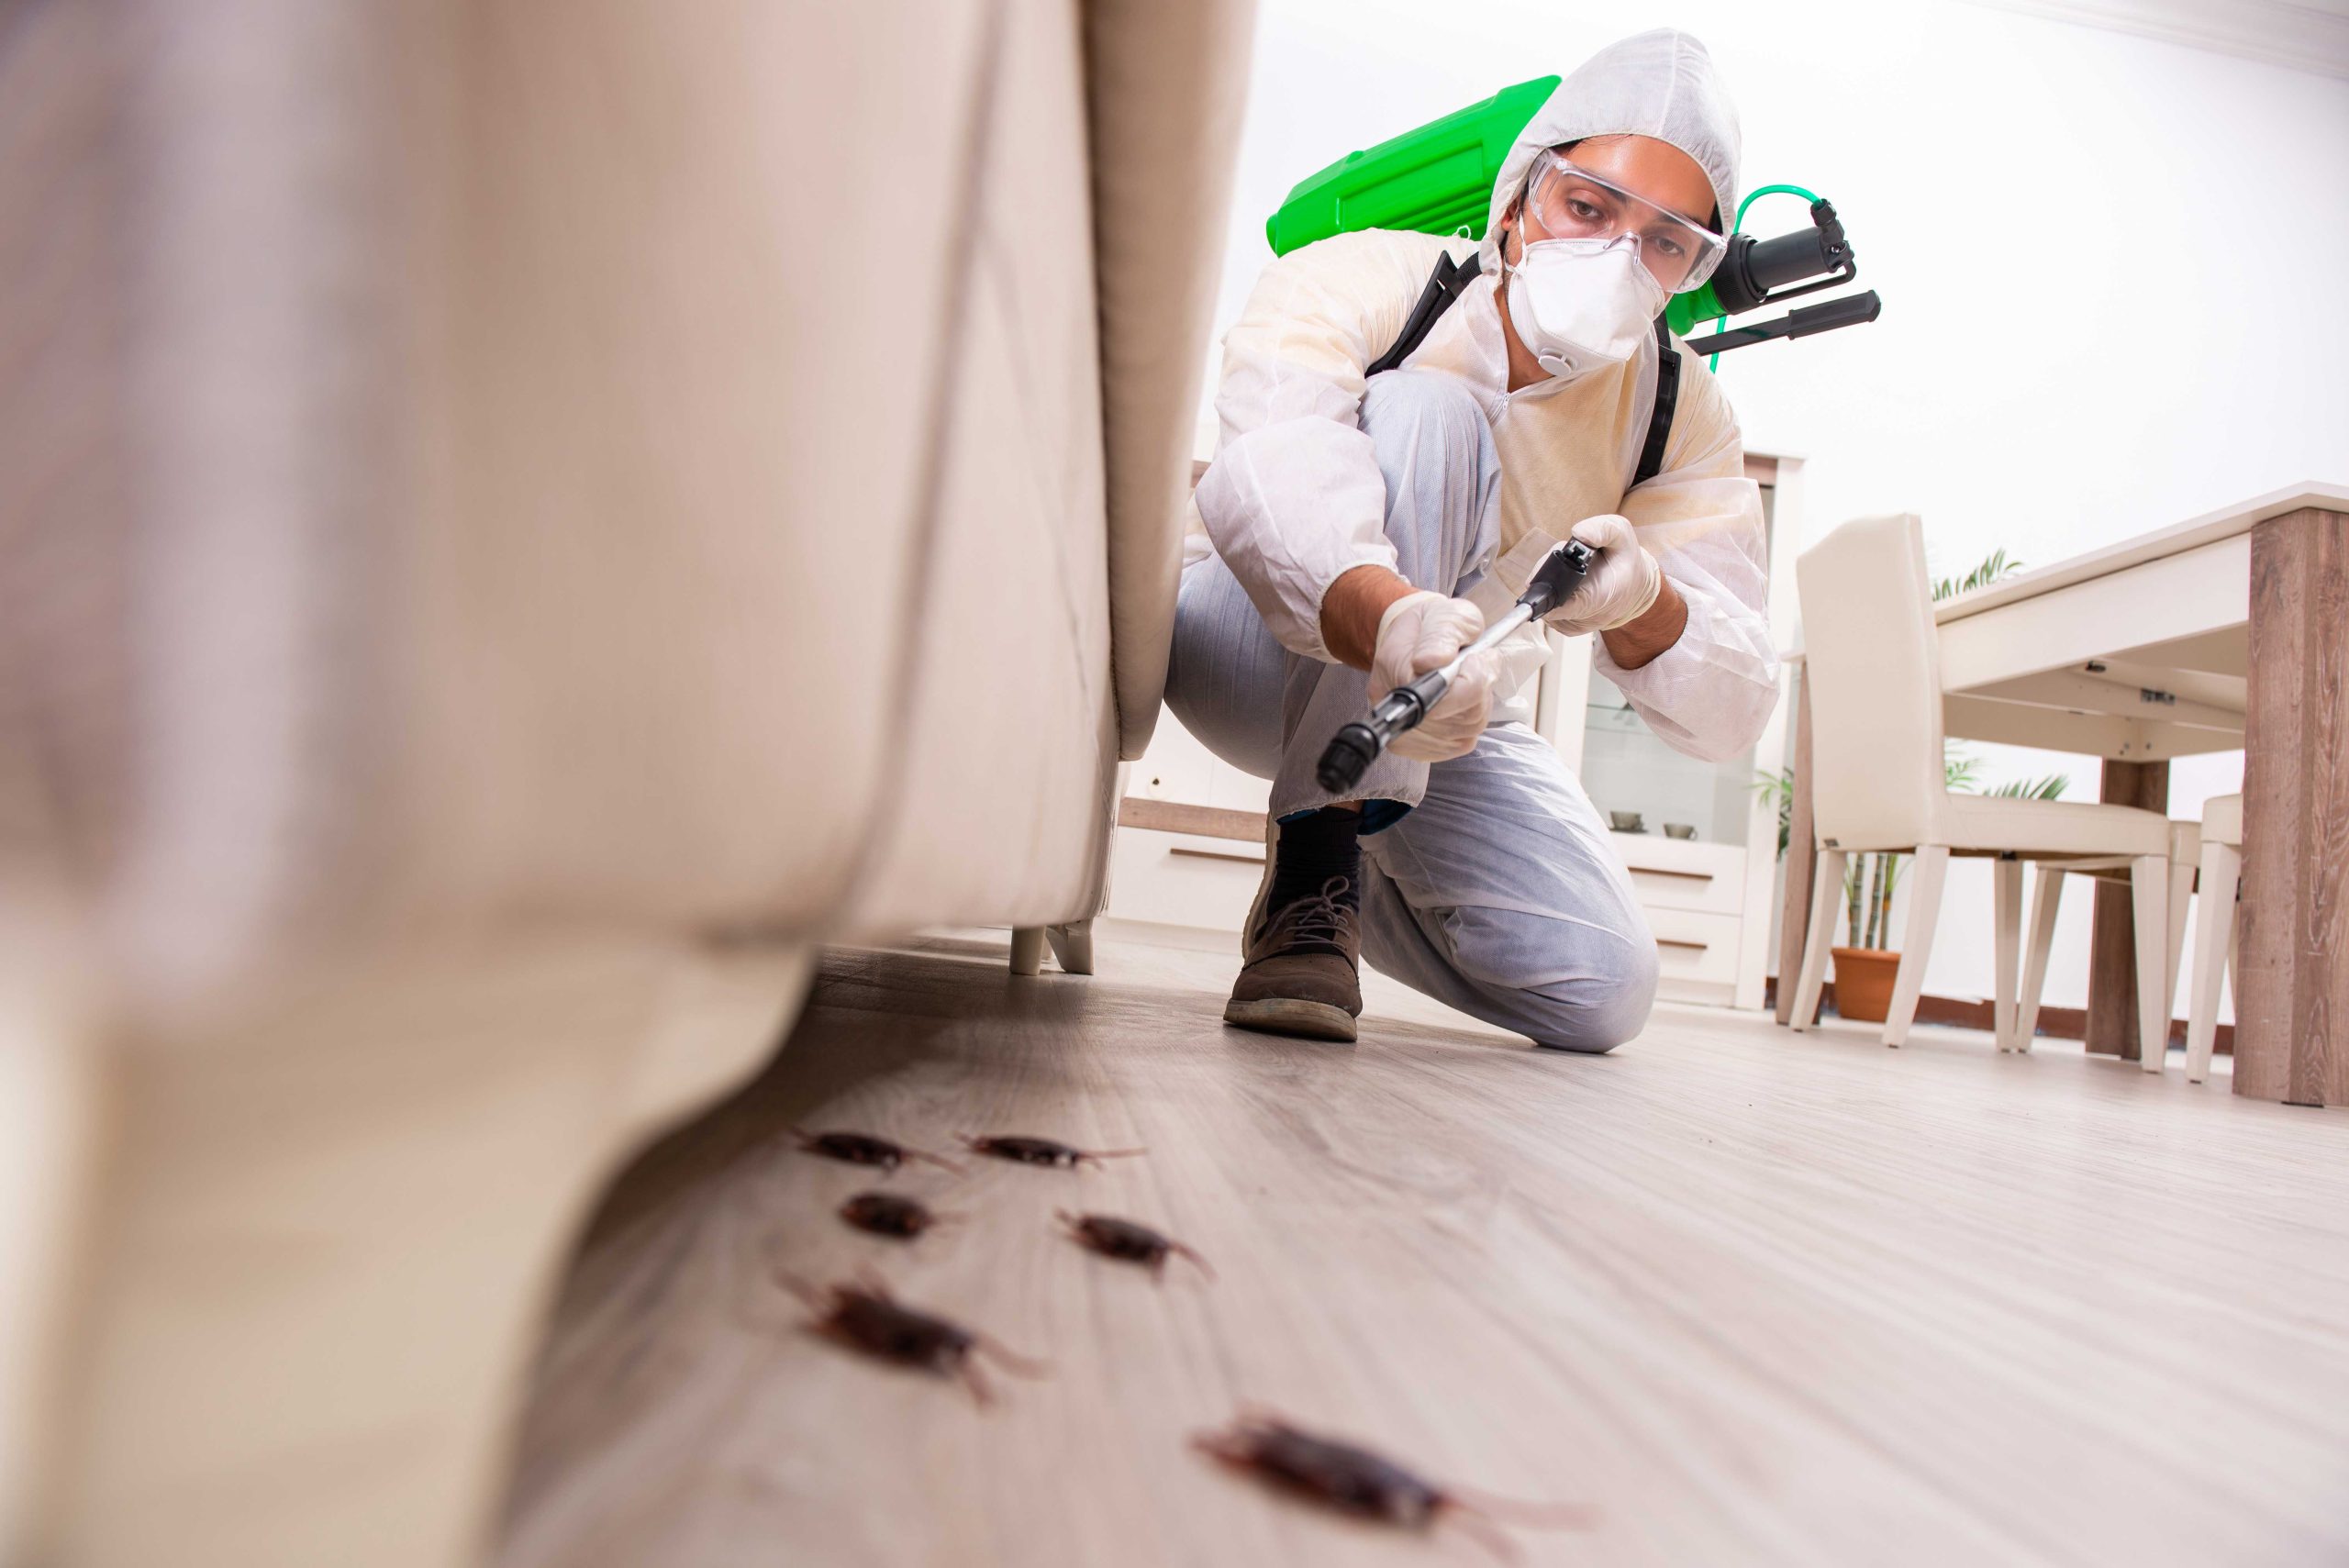 Pest-Control experts in Providence specializing in prevention and eradication of various pests. Don't let pests damage your property and endanger your health.